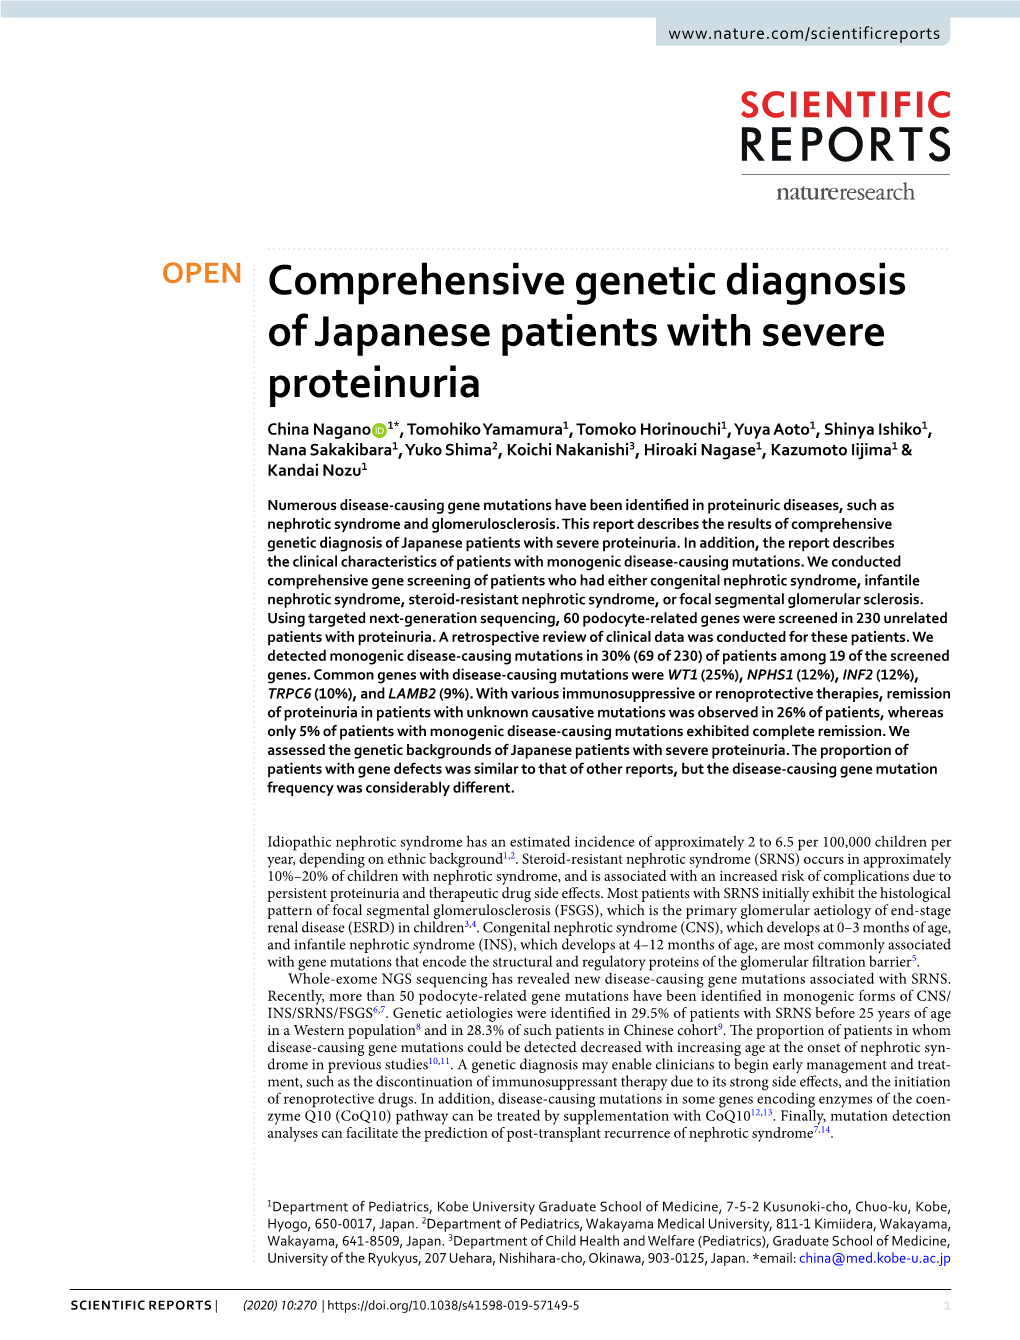 Comprehensive Genetic Diagnosis of Japanese Patients with Severe Proteinuria